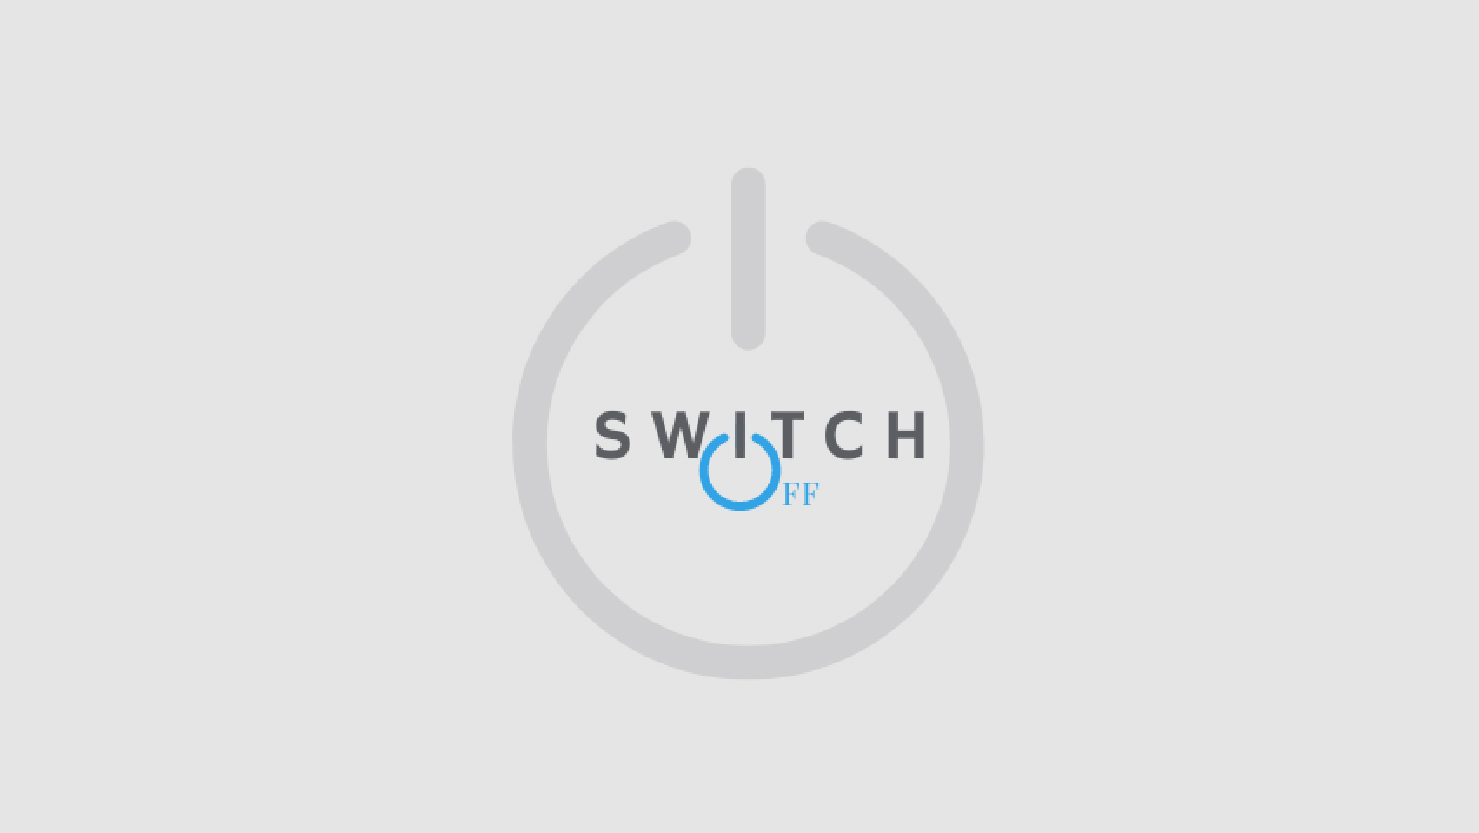 SwitchOff project logo